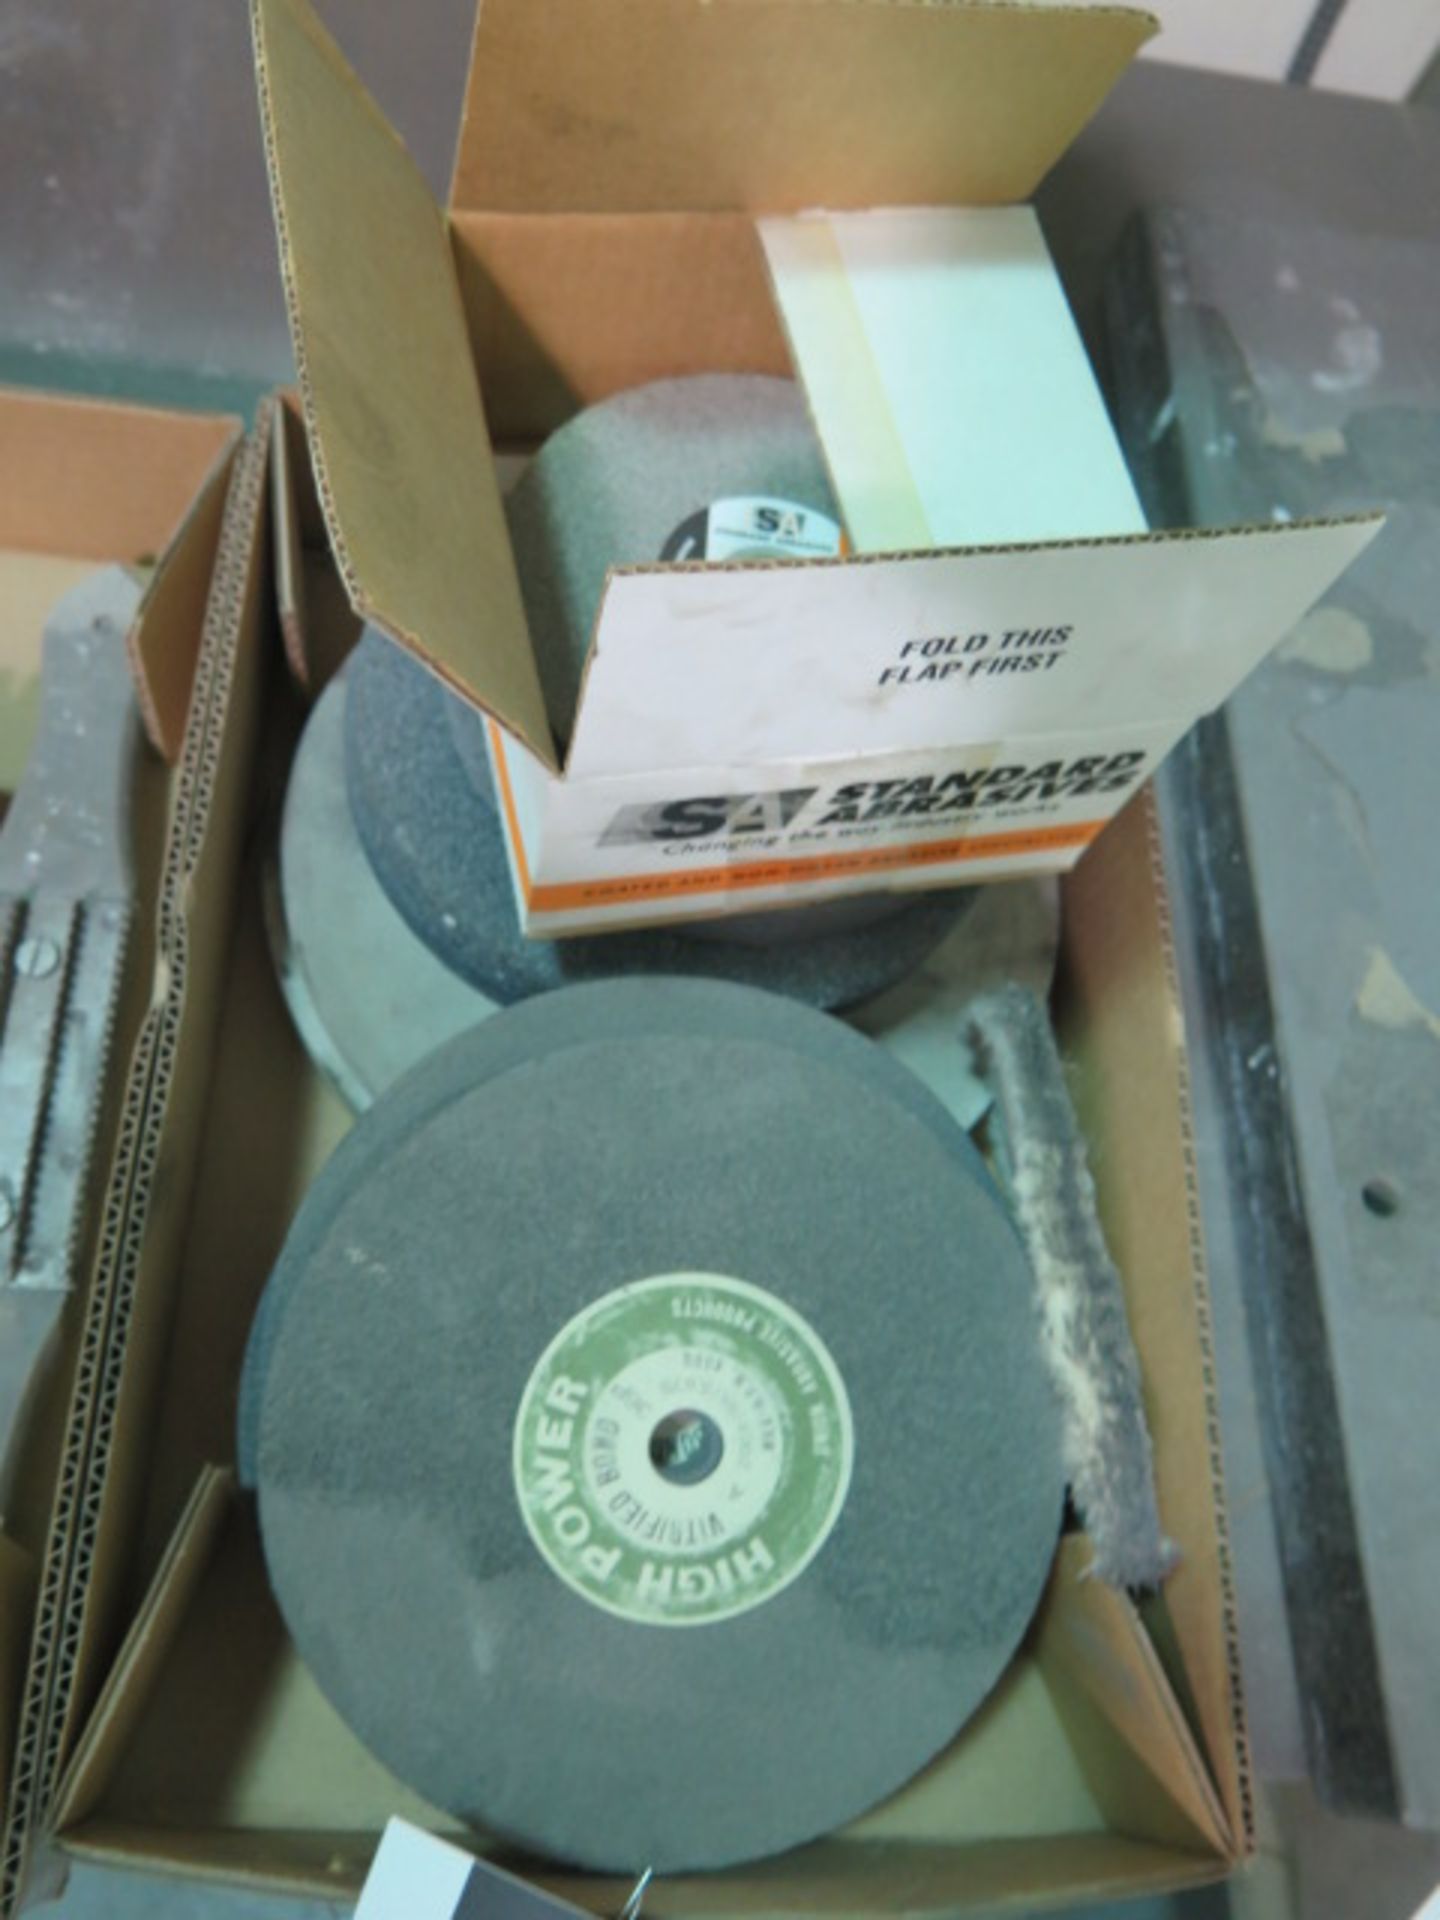 Grinding Wheels and Misc - Image 3 of 3